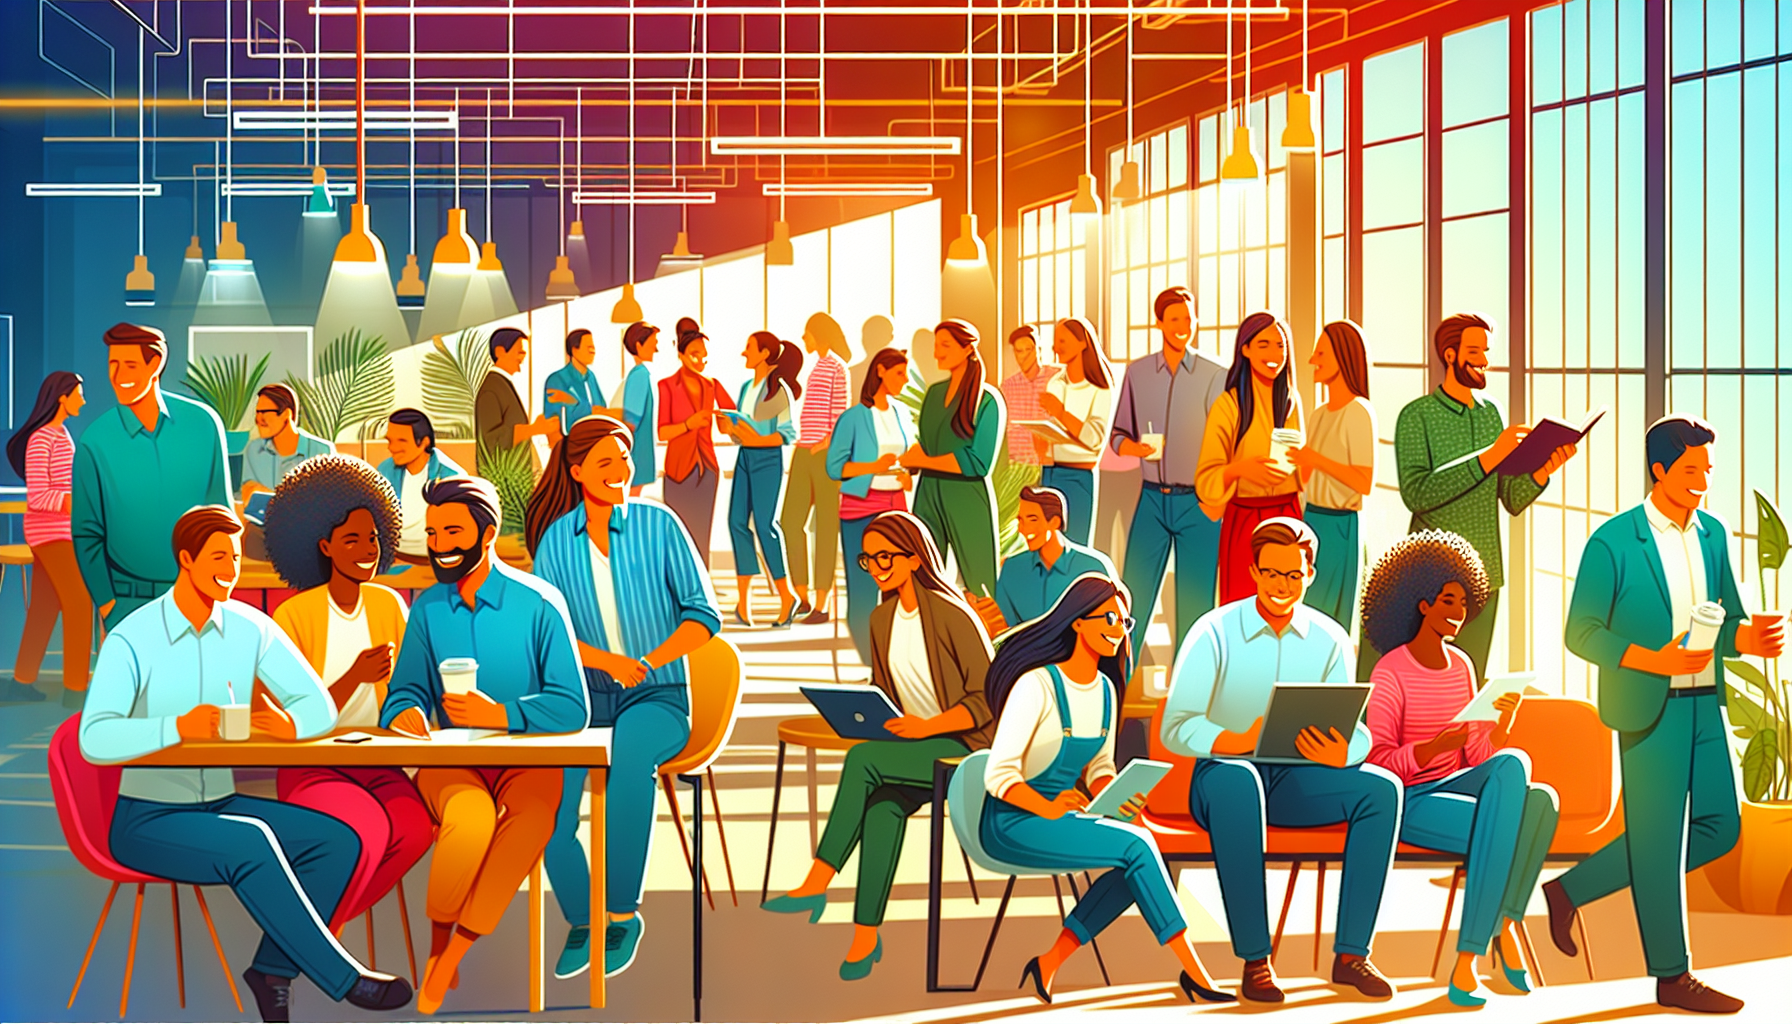 Illustration showcasing company culture and values